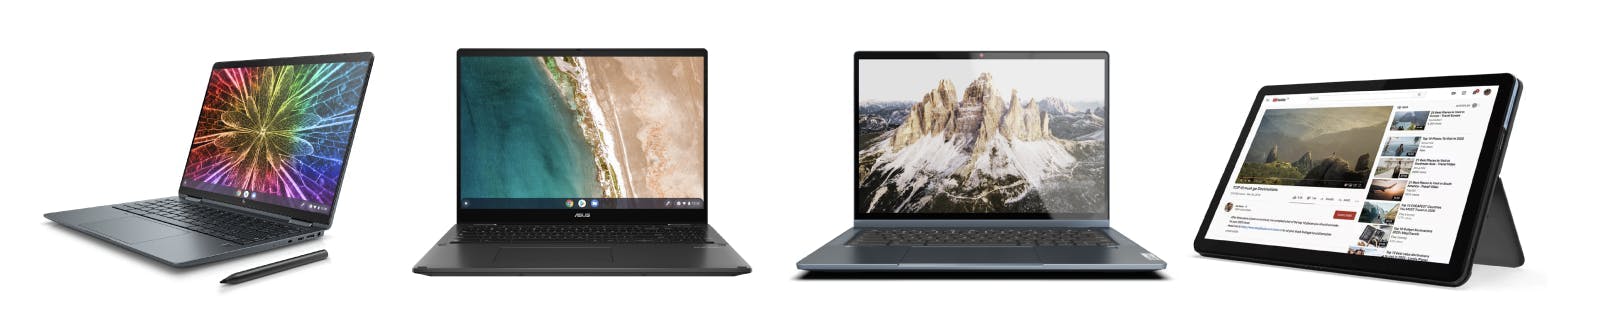 We’ll be releasing more than 75 new models of Chromebooks in 2022.